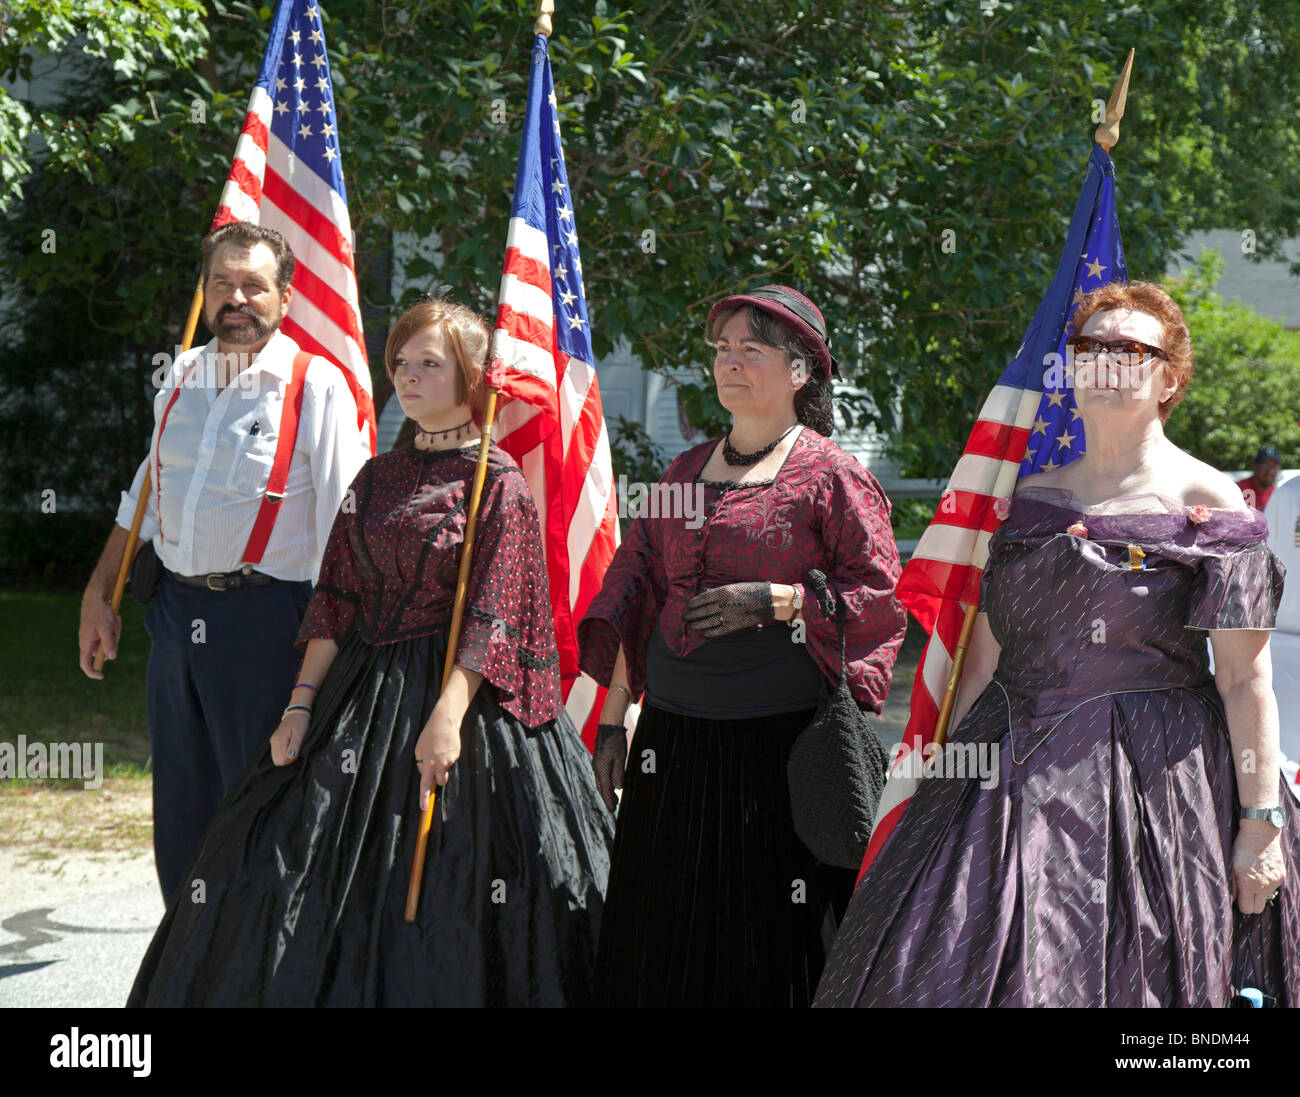 Amherst, New Hampshire - Reenactors of the Civil War period march in the July 4 parade in a small New England town. Stock Photo